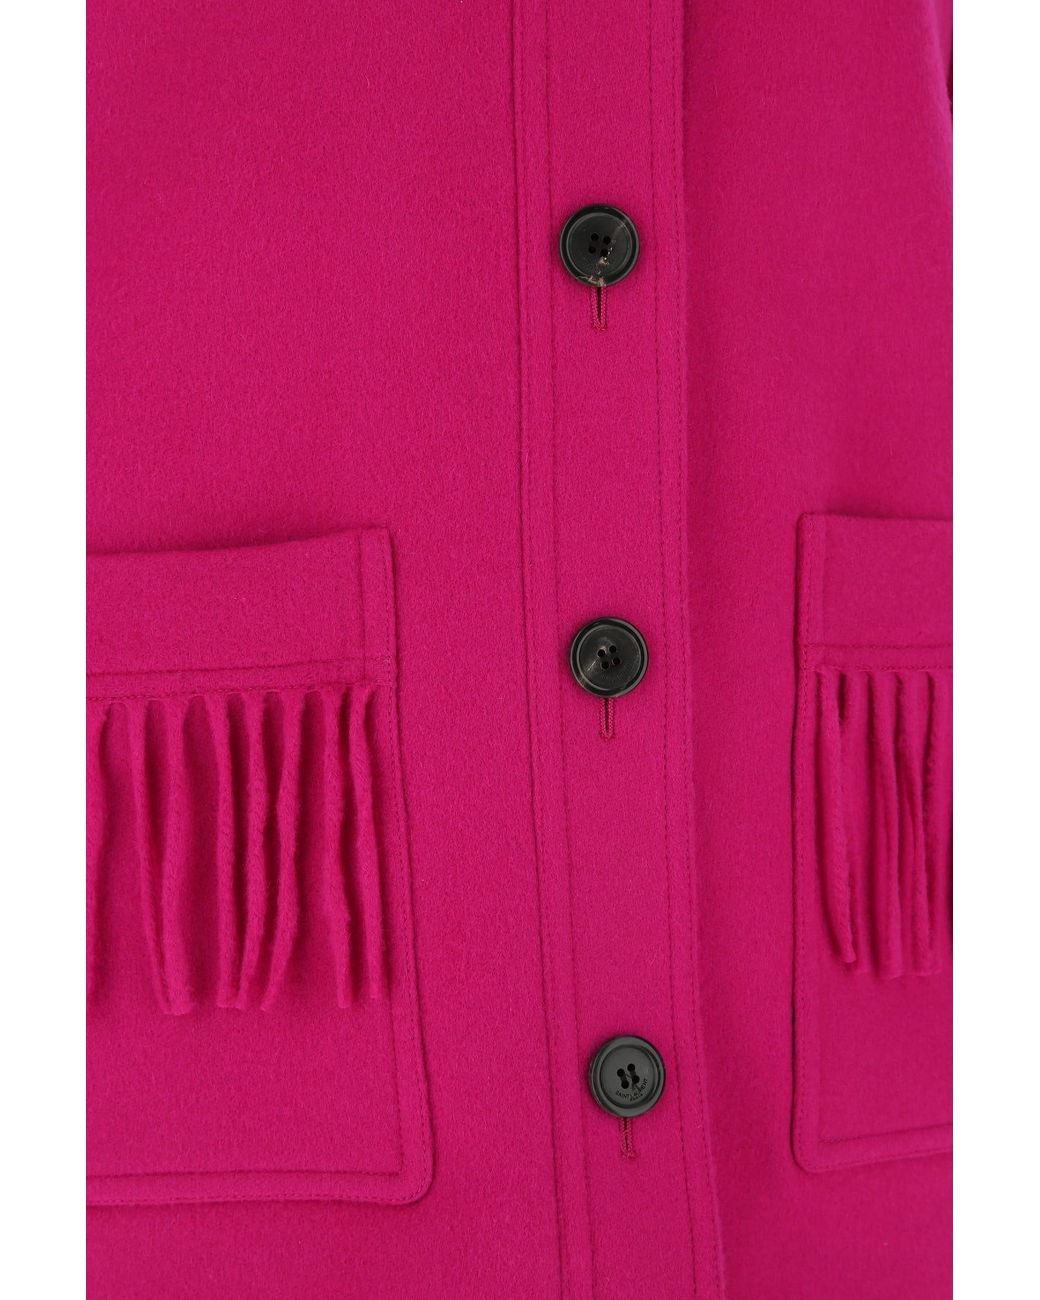 Saint Laurent Fuchsia Wool Ble in Pink - Save 48% - Lyst